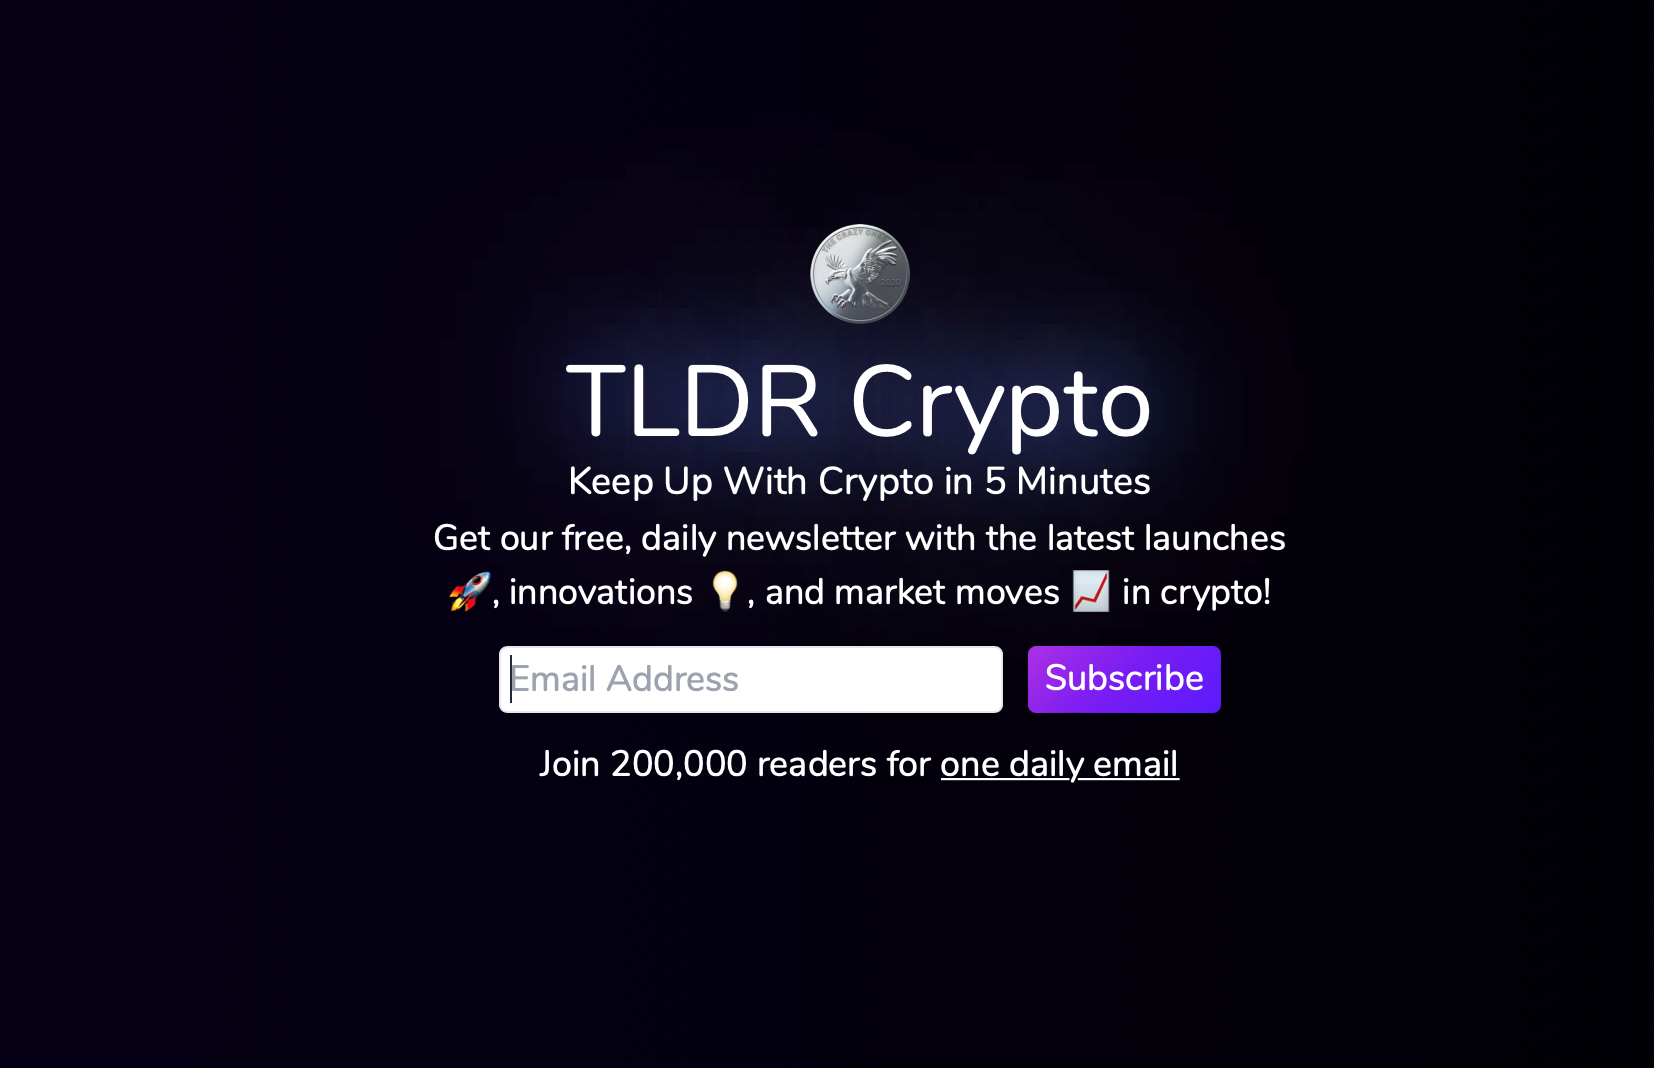 TLDR Crypto